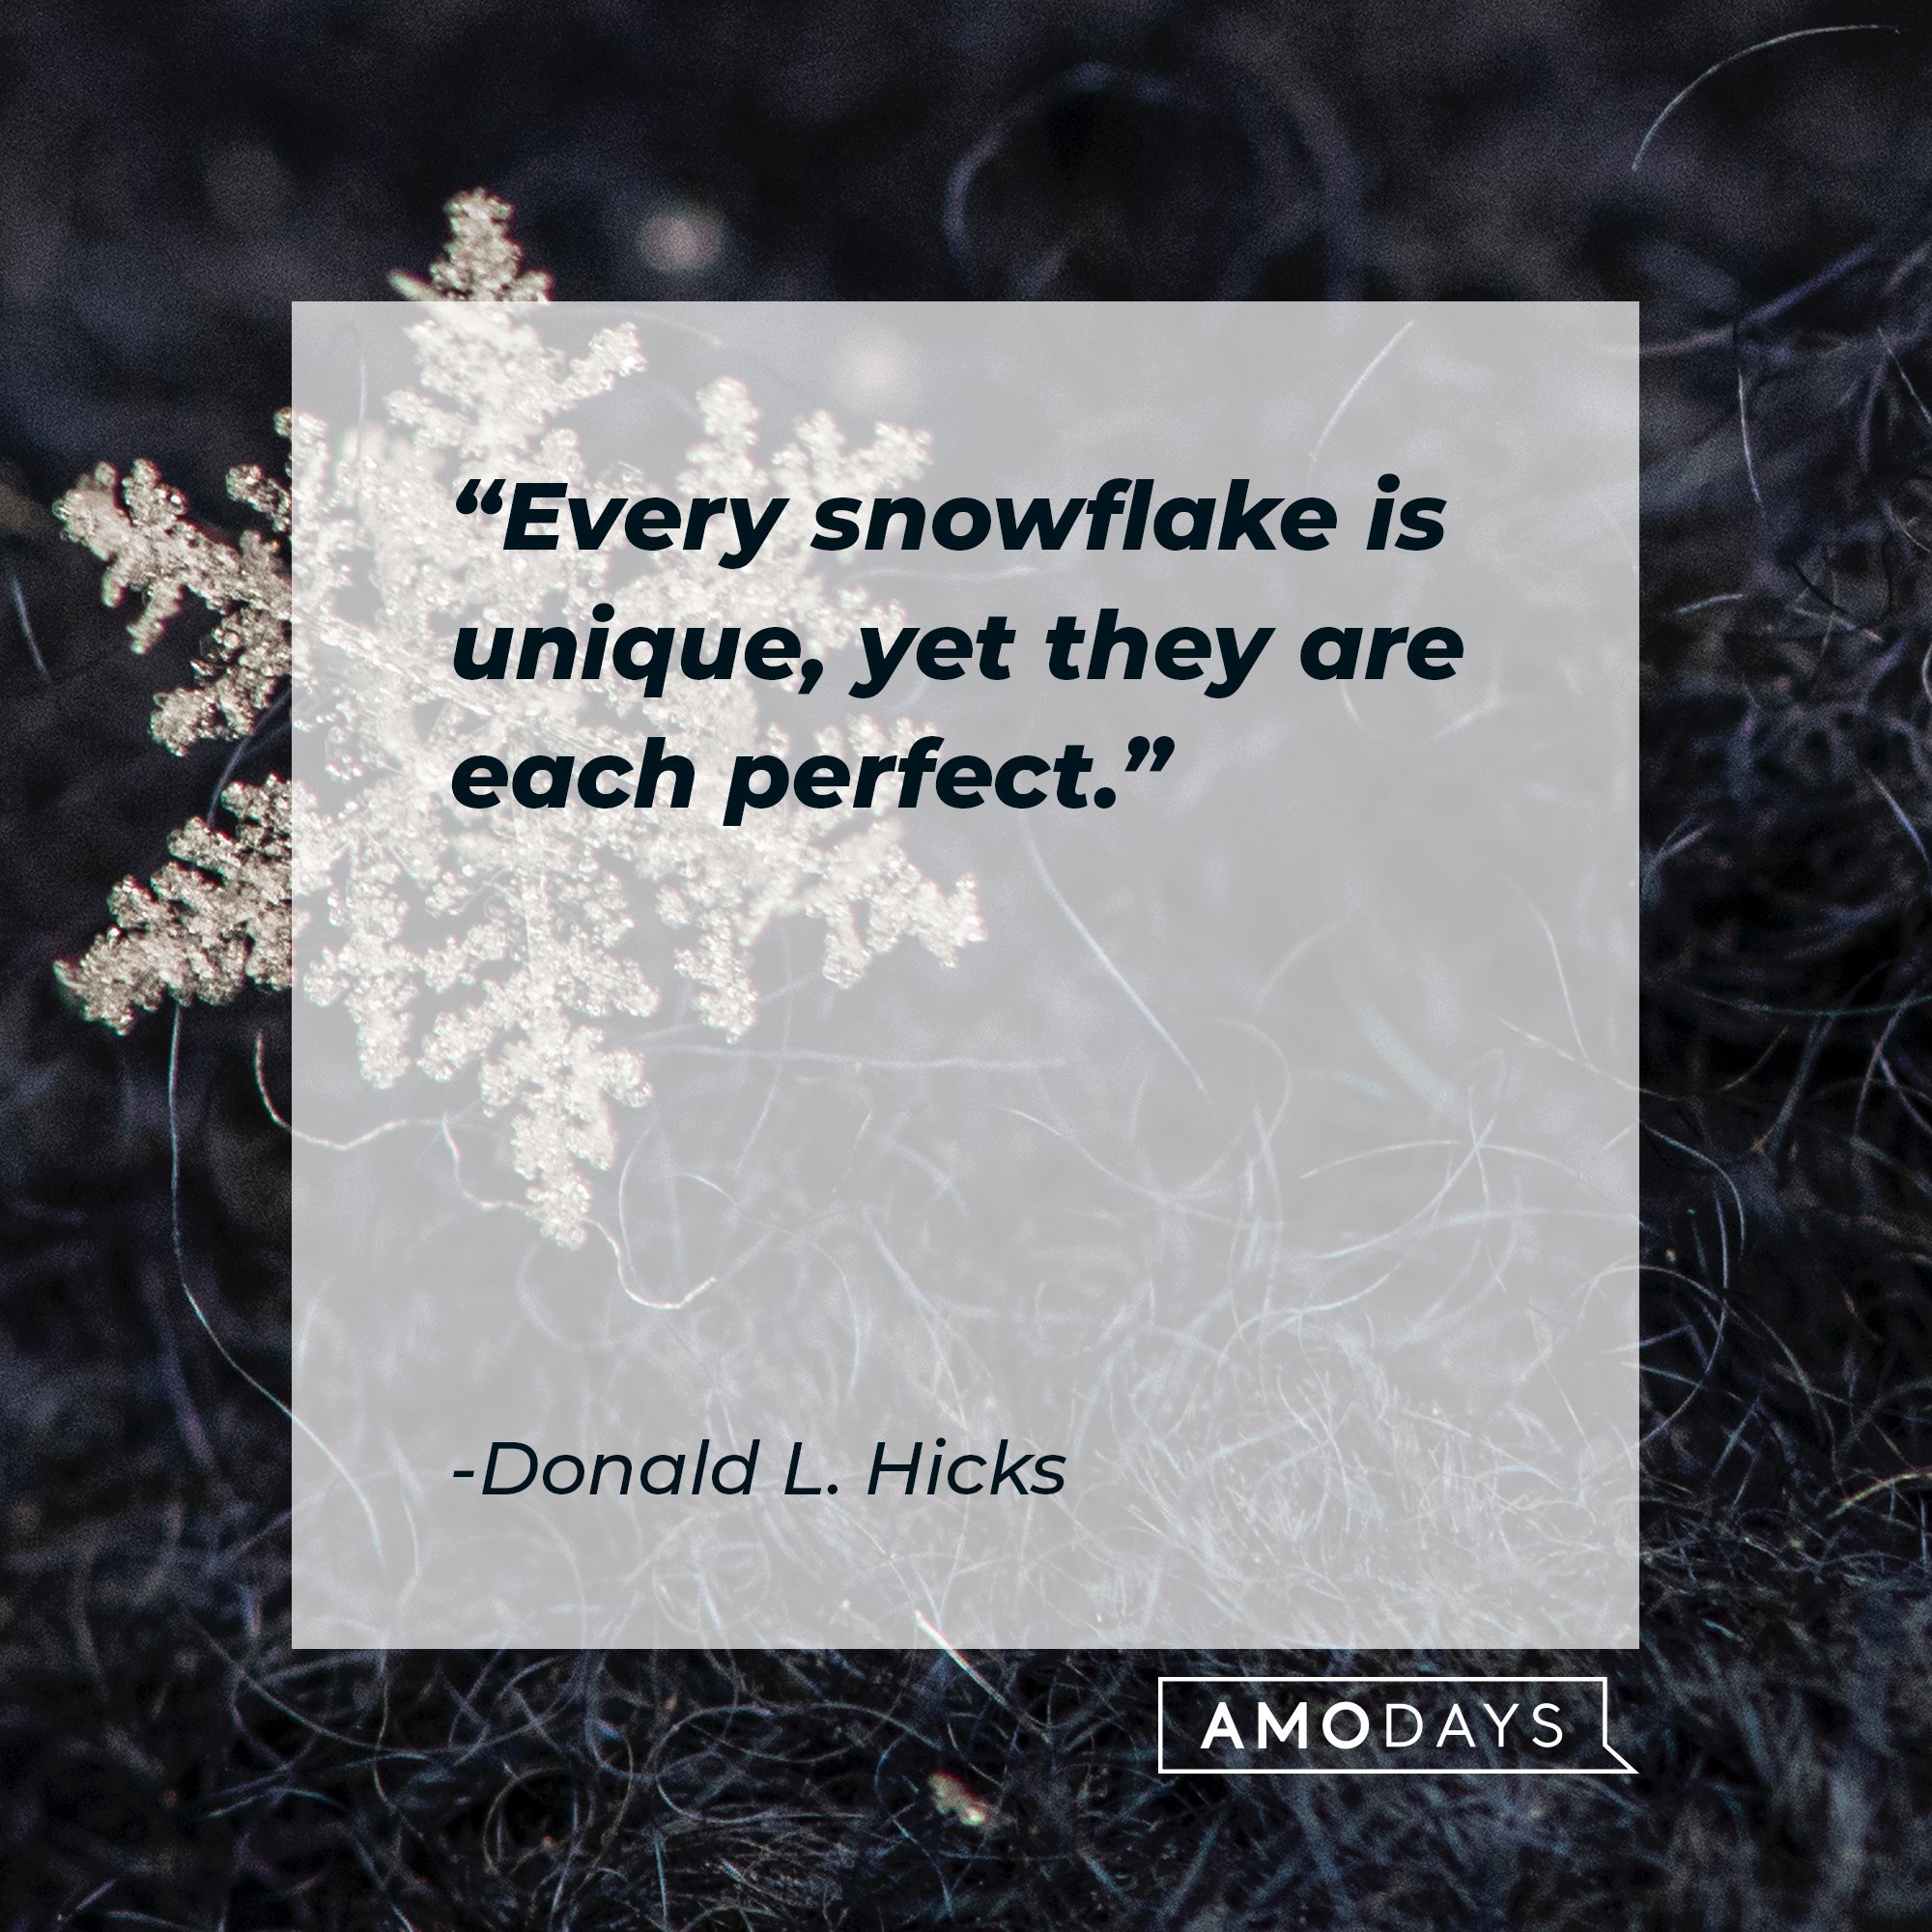   Donald L. Hicks’ quote: "Every snowflake is unique, yet they are each perfect." | Image: AmoDays